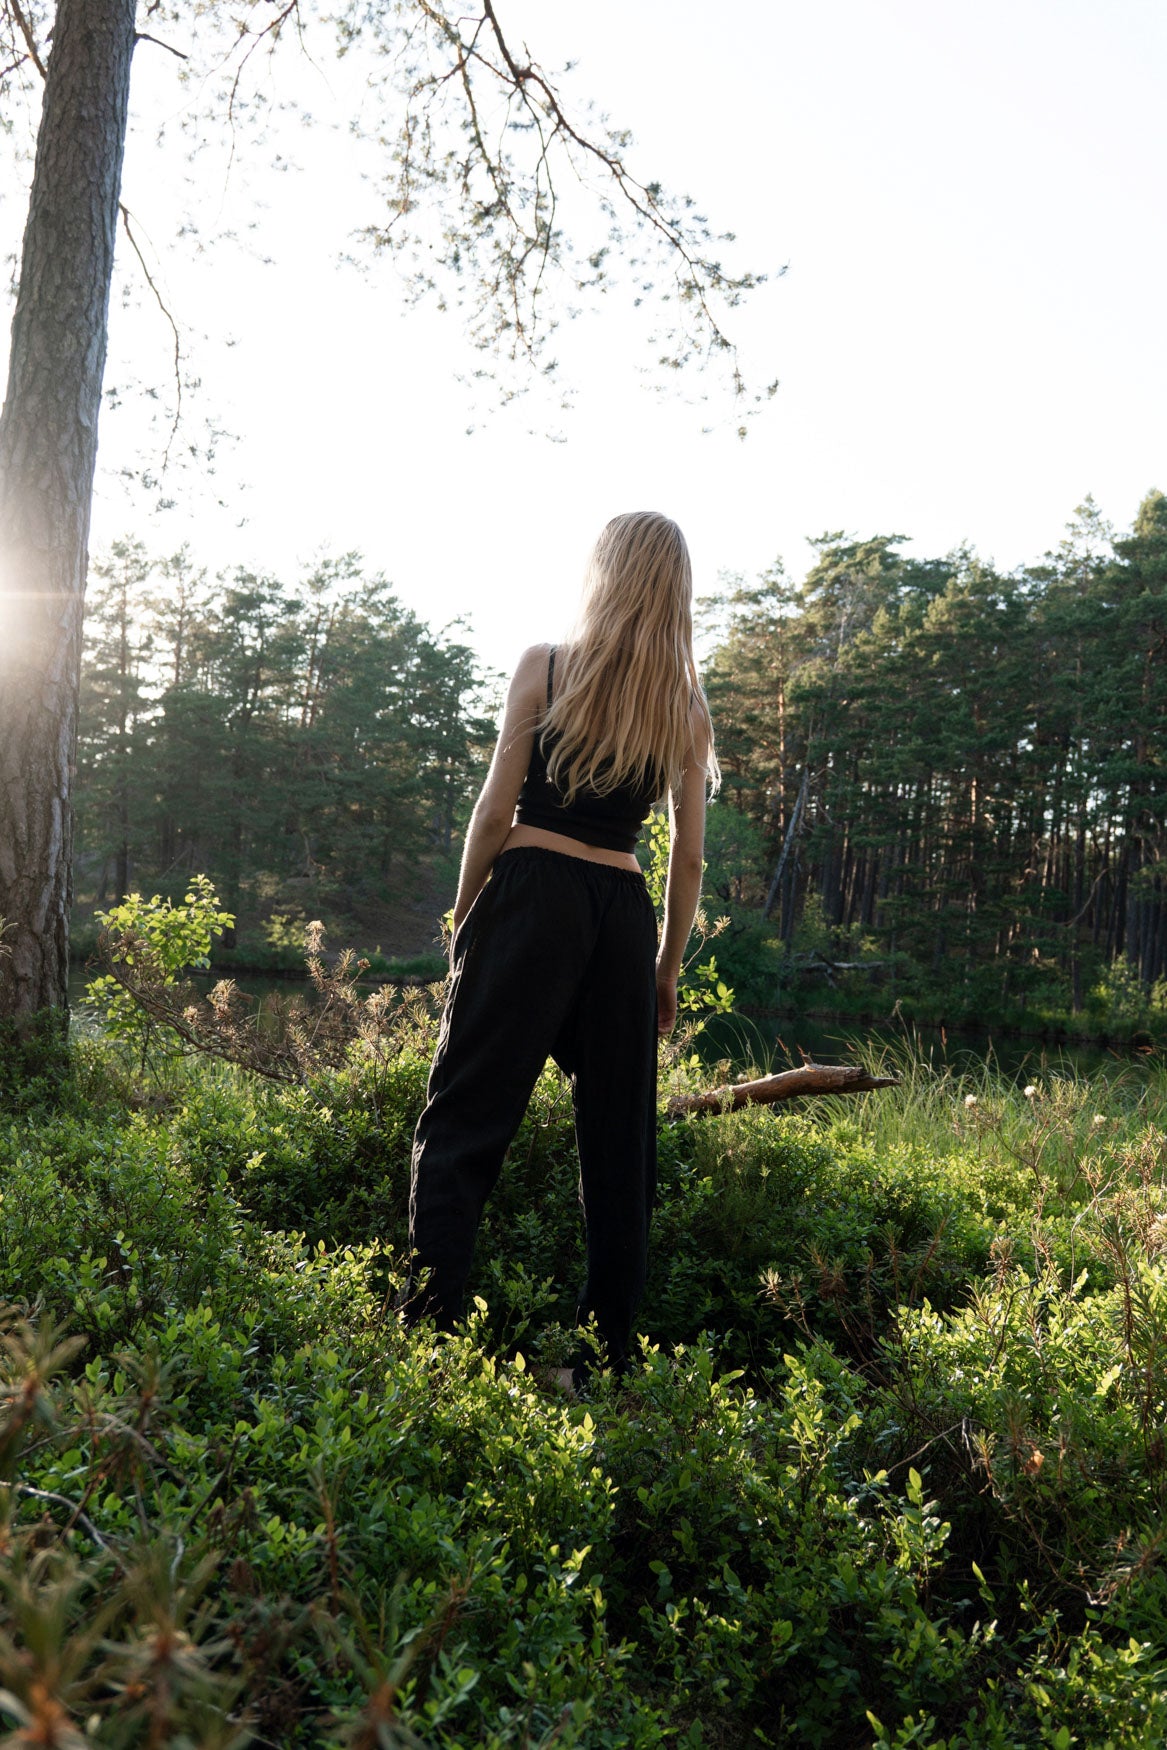 Organic, sustainable black linen pants and top that can be worn as a loungewear, pajamas or sweatpants with a top. These pants are natural, comfortable, soft and pure. These pants are a conscious and healthy choice for your body and environment. Handmade in the North.